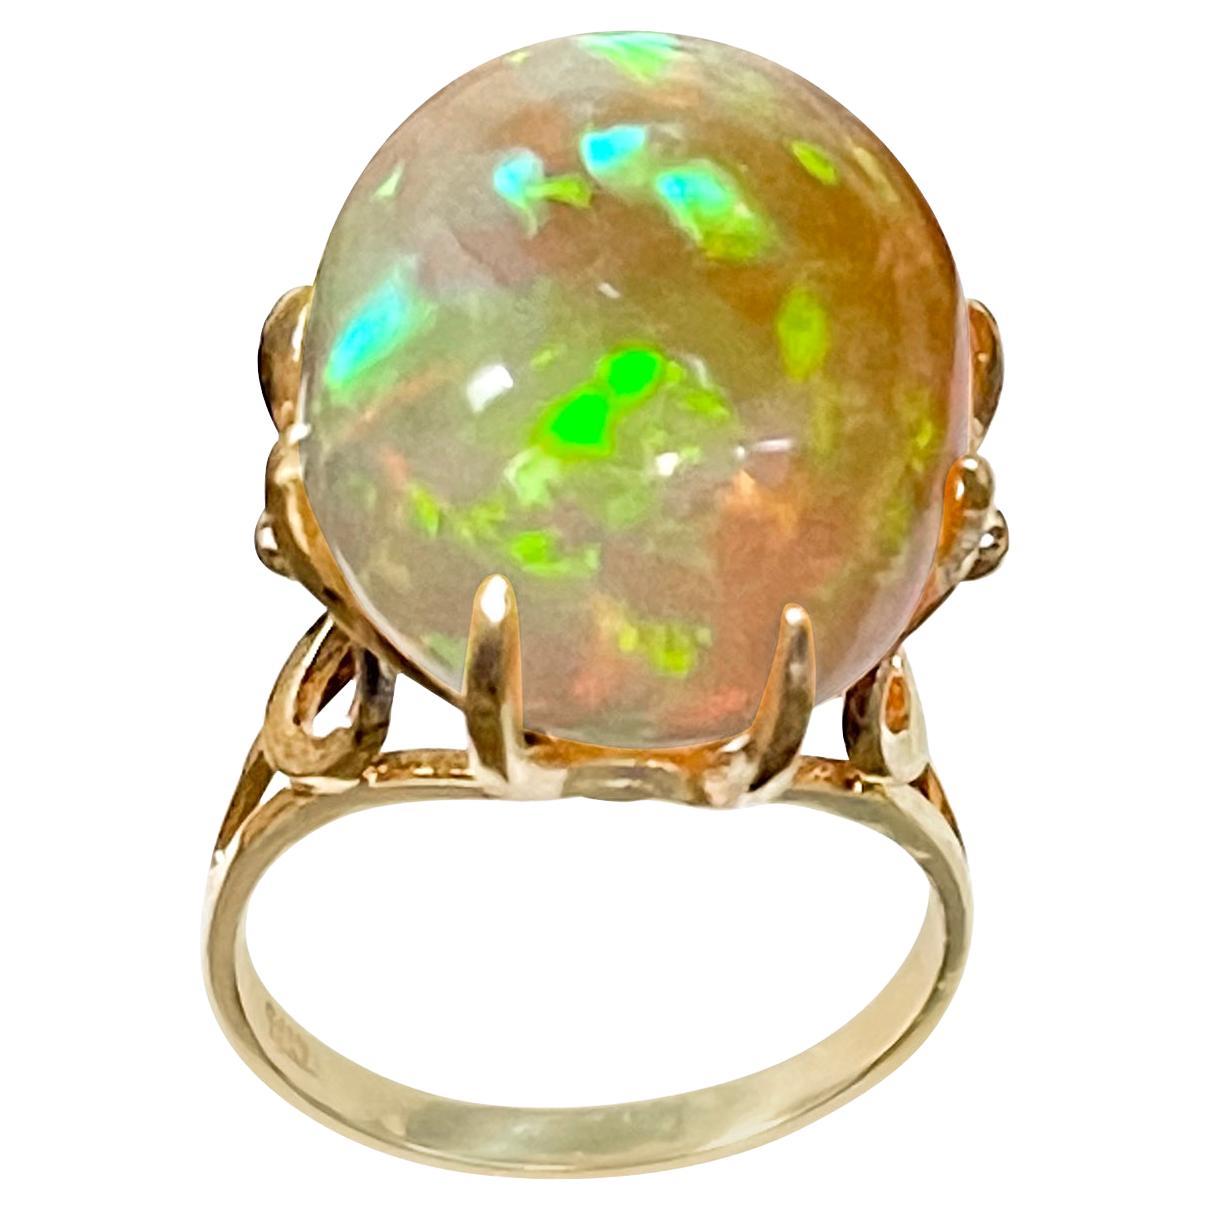 12 Carat Oval Shape Ethiopian Opal Cocktail Ring 14 Karat Yellow Gold For Sale